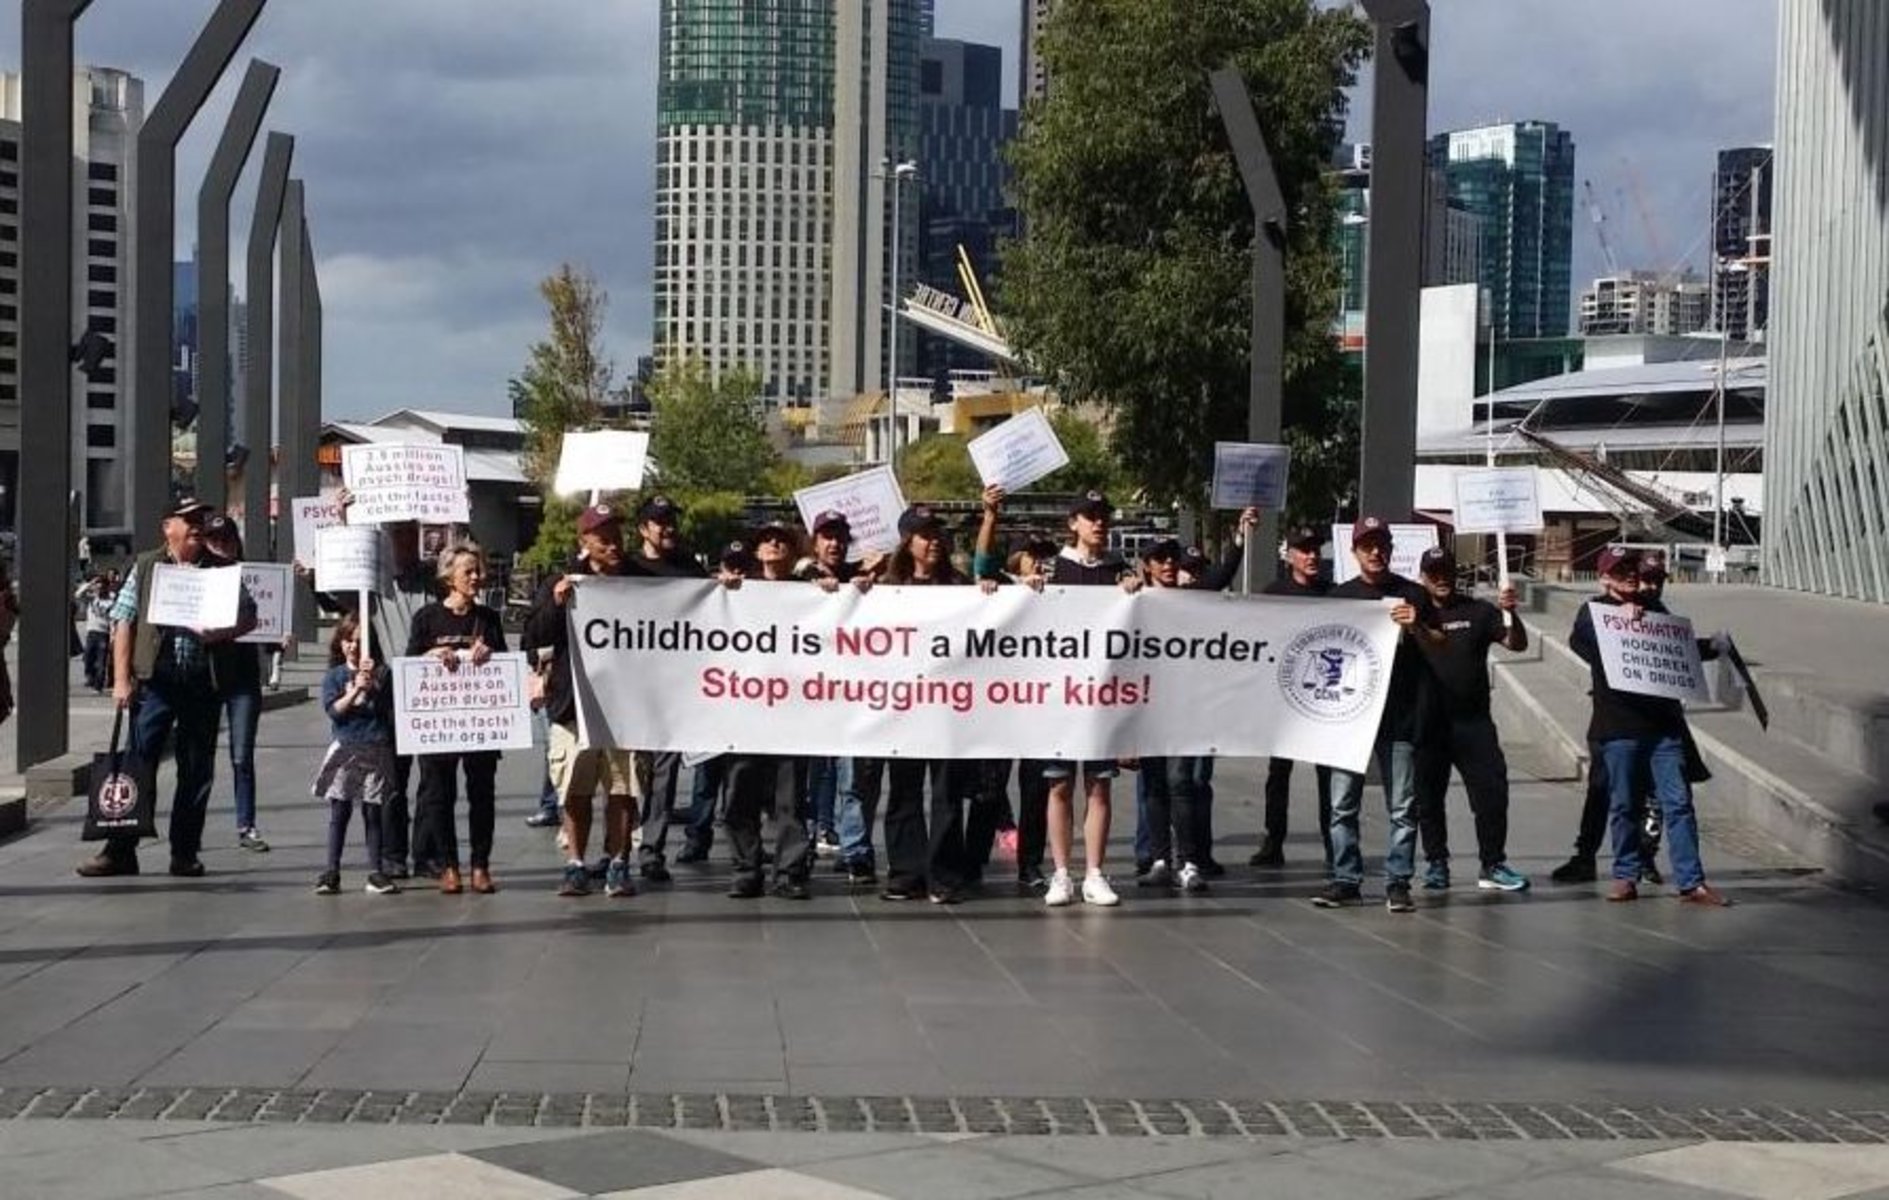 Citizens Commission on Human Rights protests at the WPA Congress at the Melbourne Convention Centre 